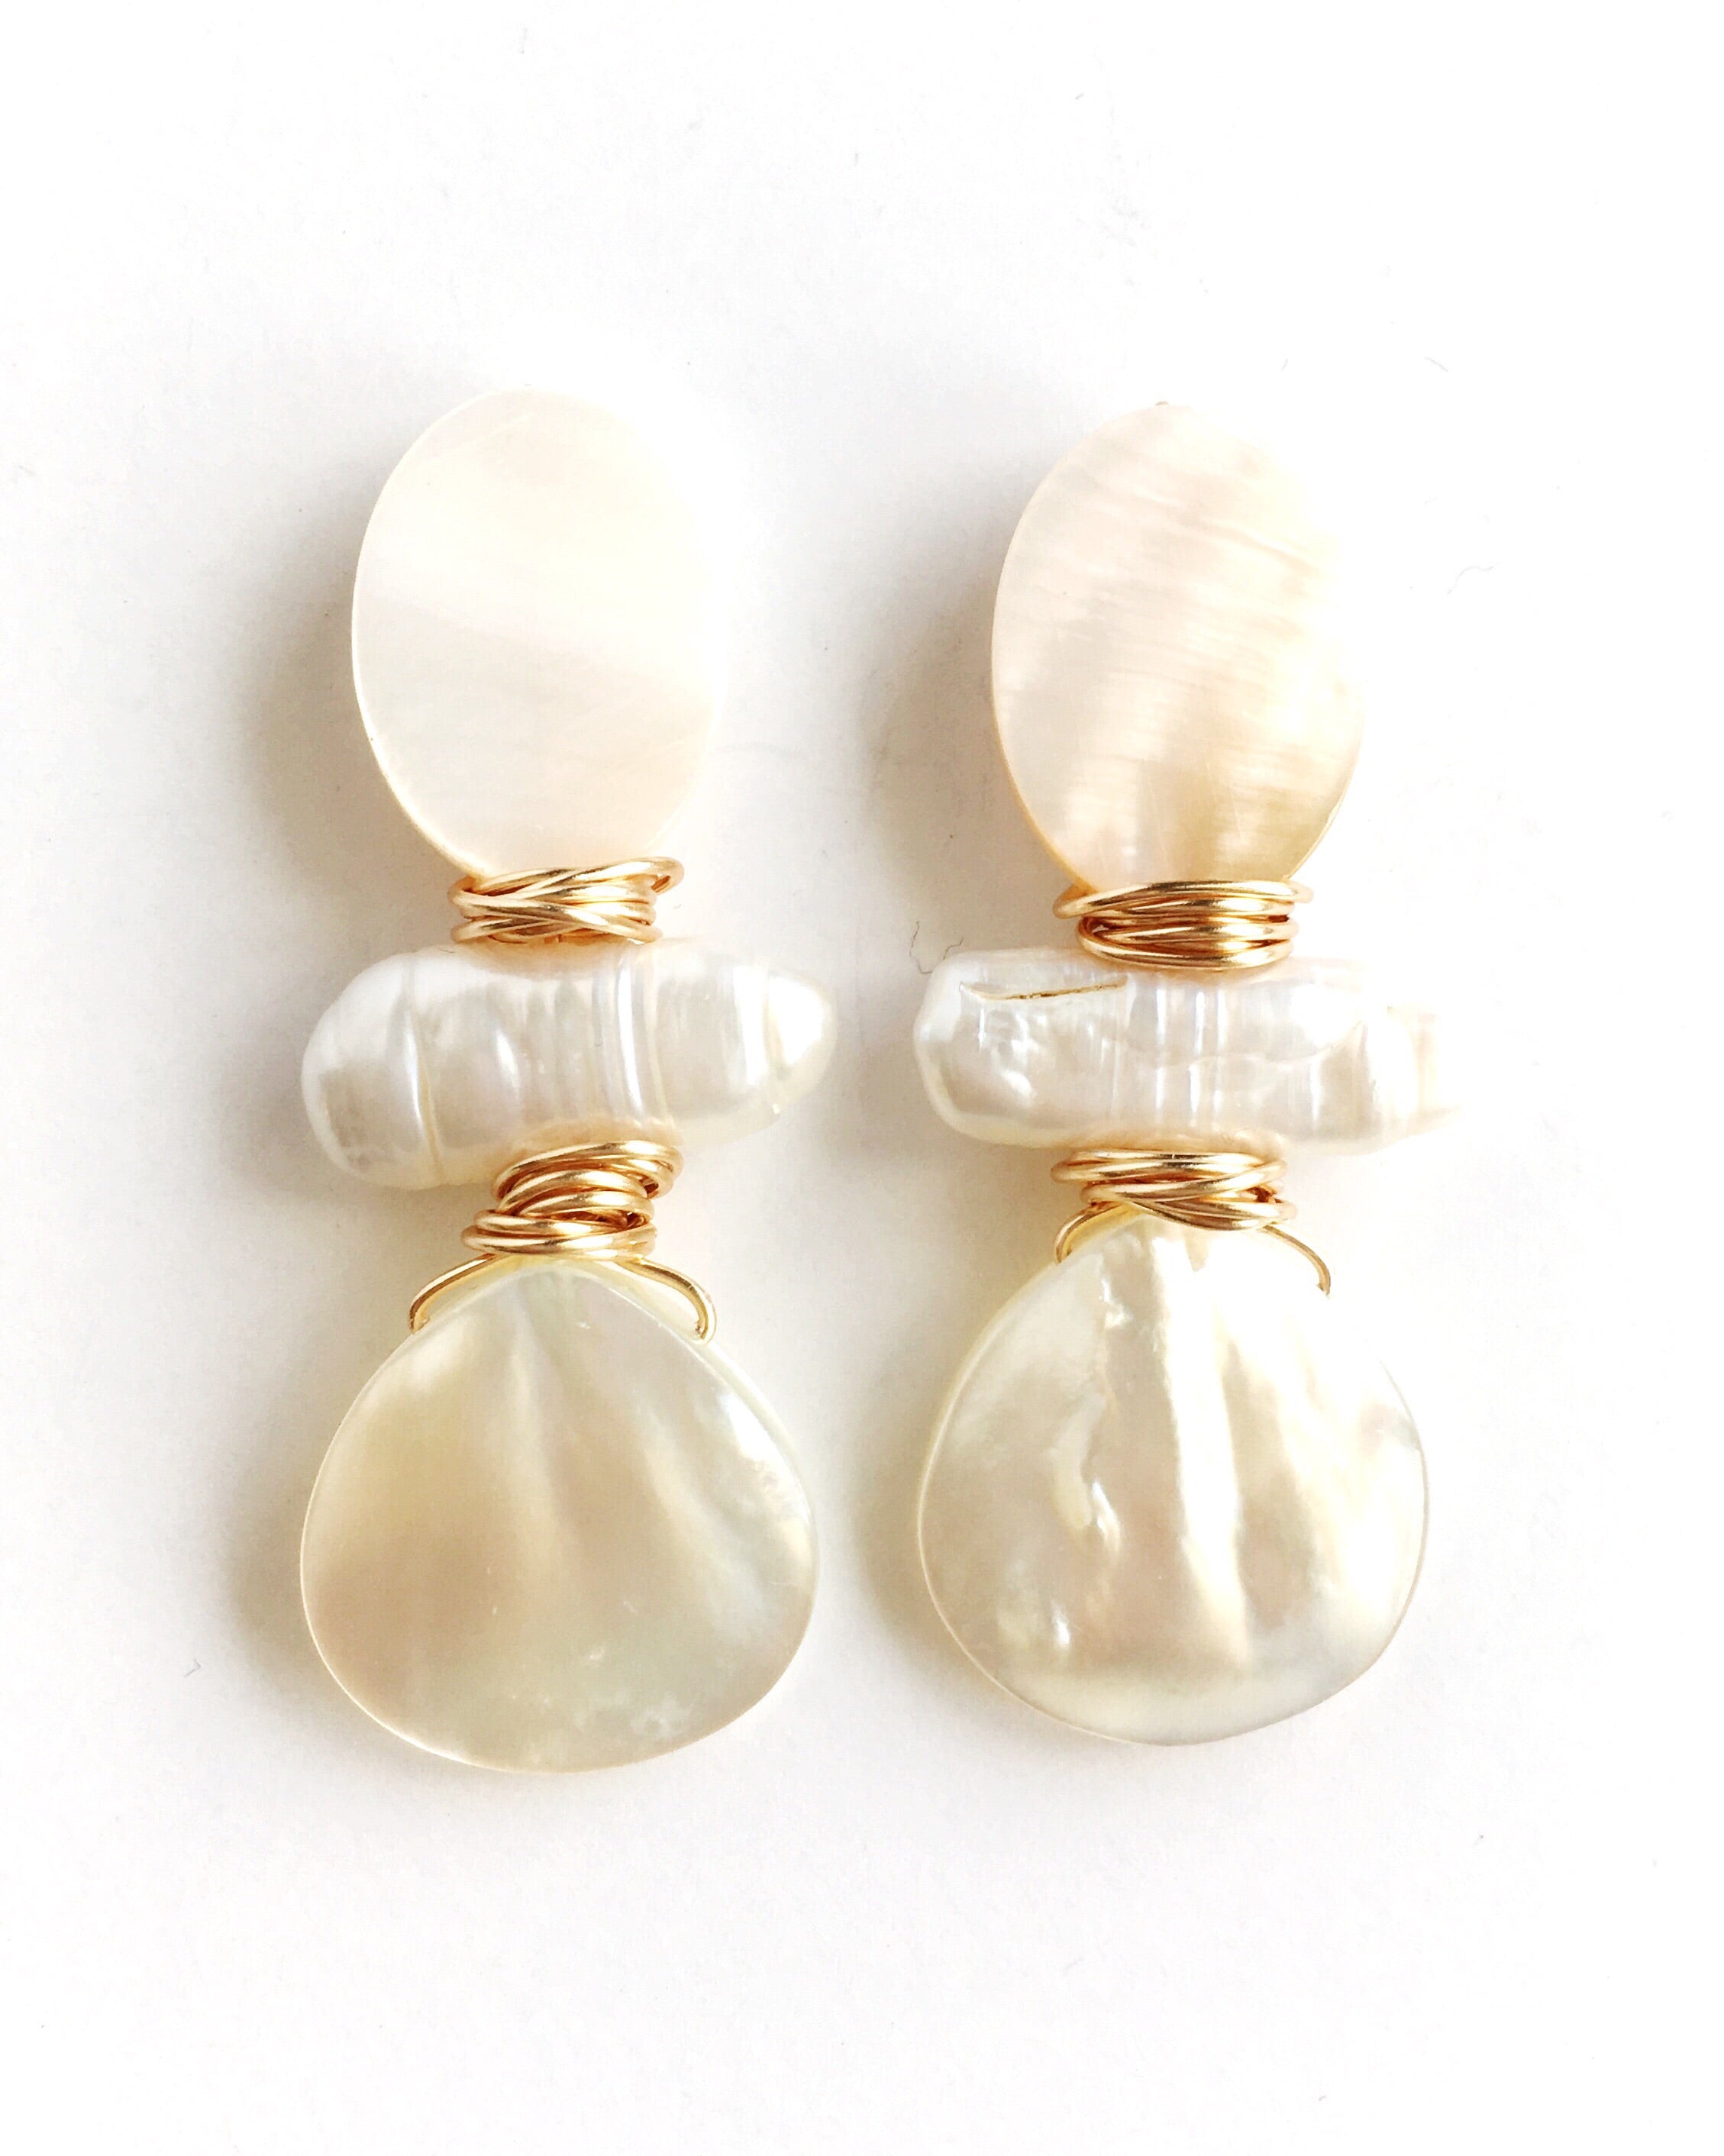 Three Stone Mother of Pearl and pearl stone earrings wrapped with gold plated wire